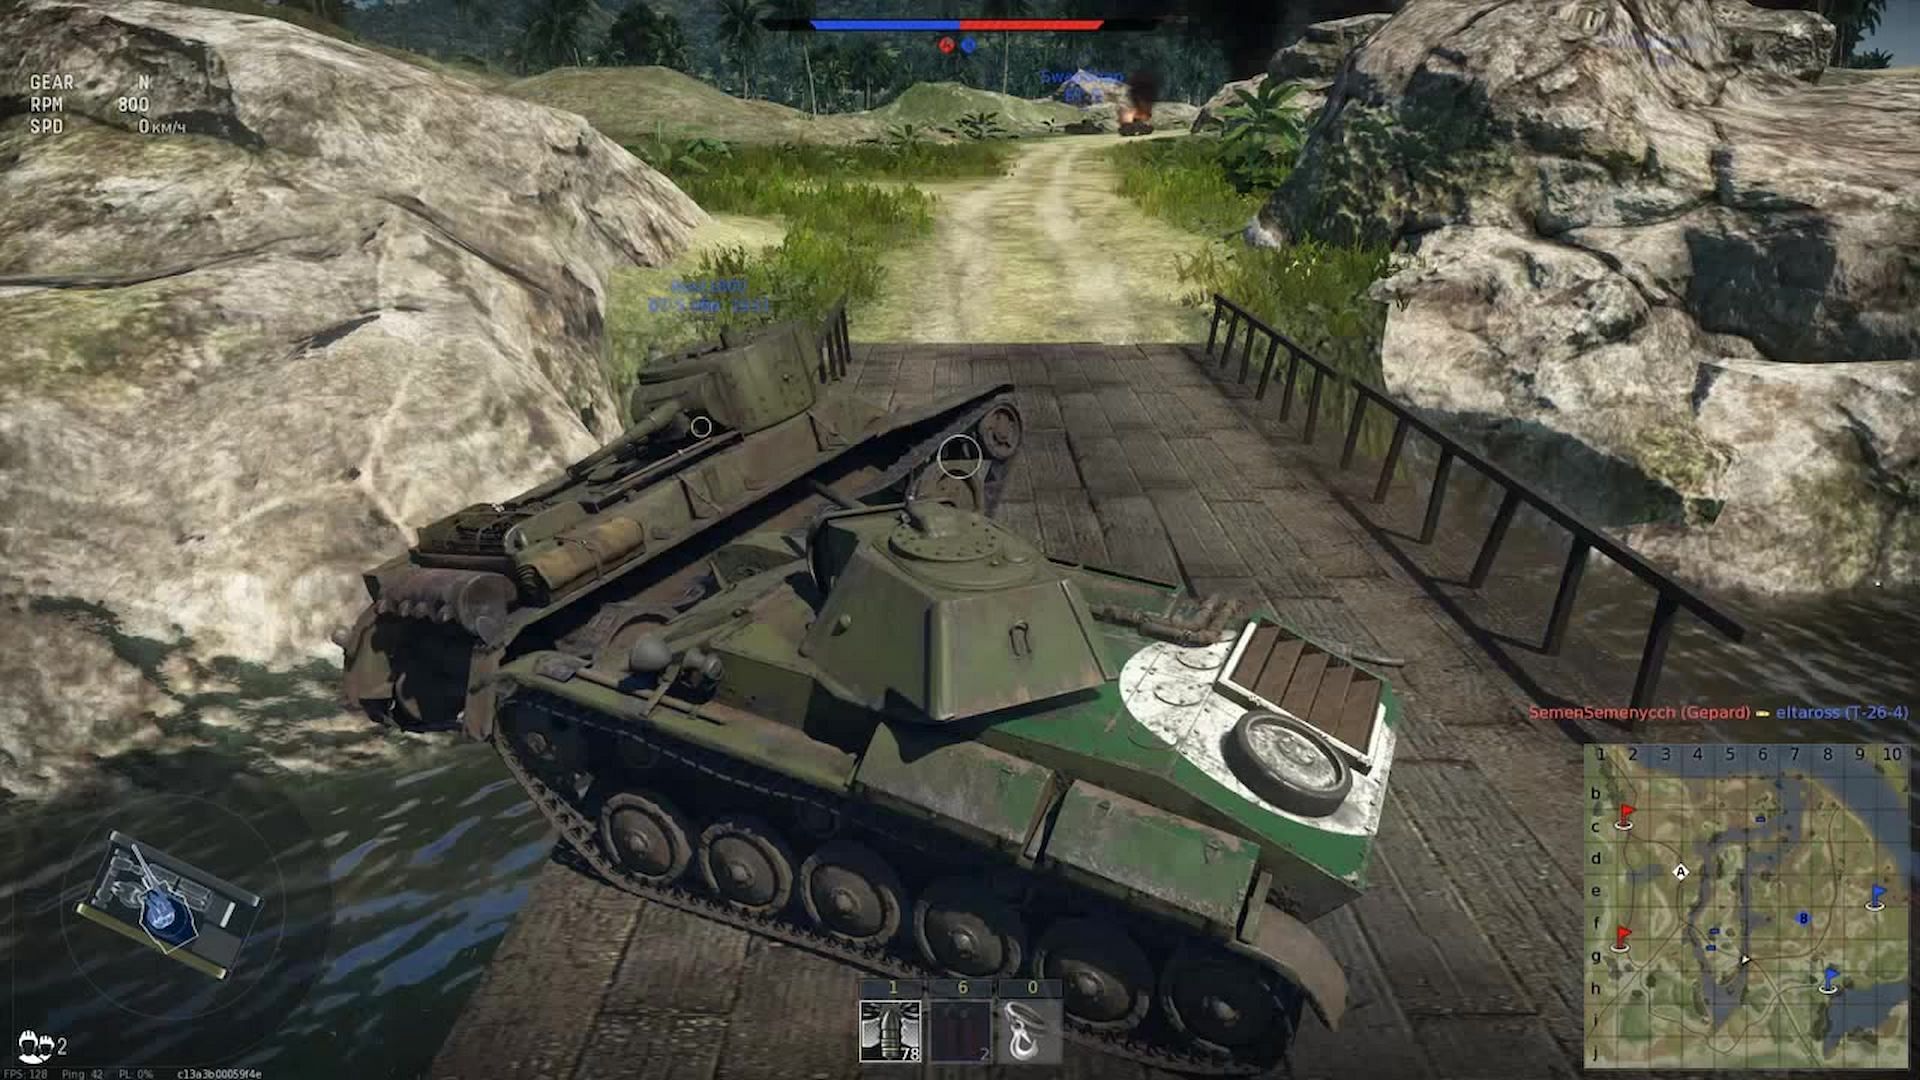 It is best to avoid ramming other tanks (Image via War Thunder)